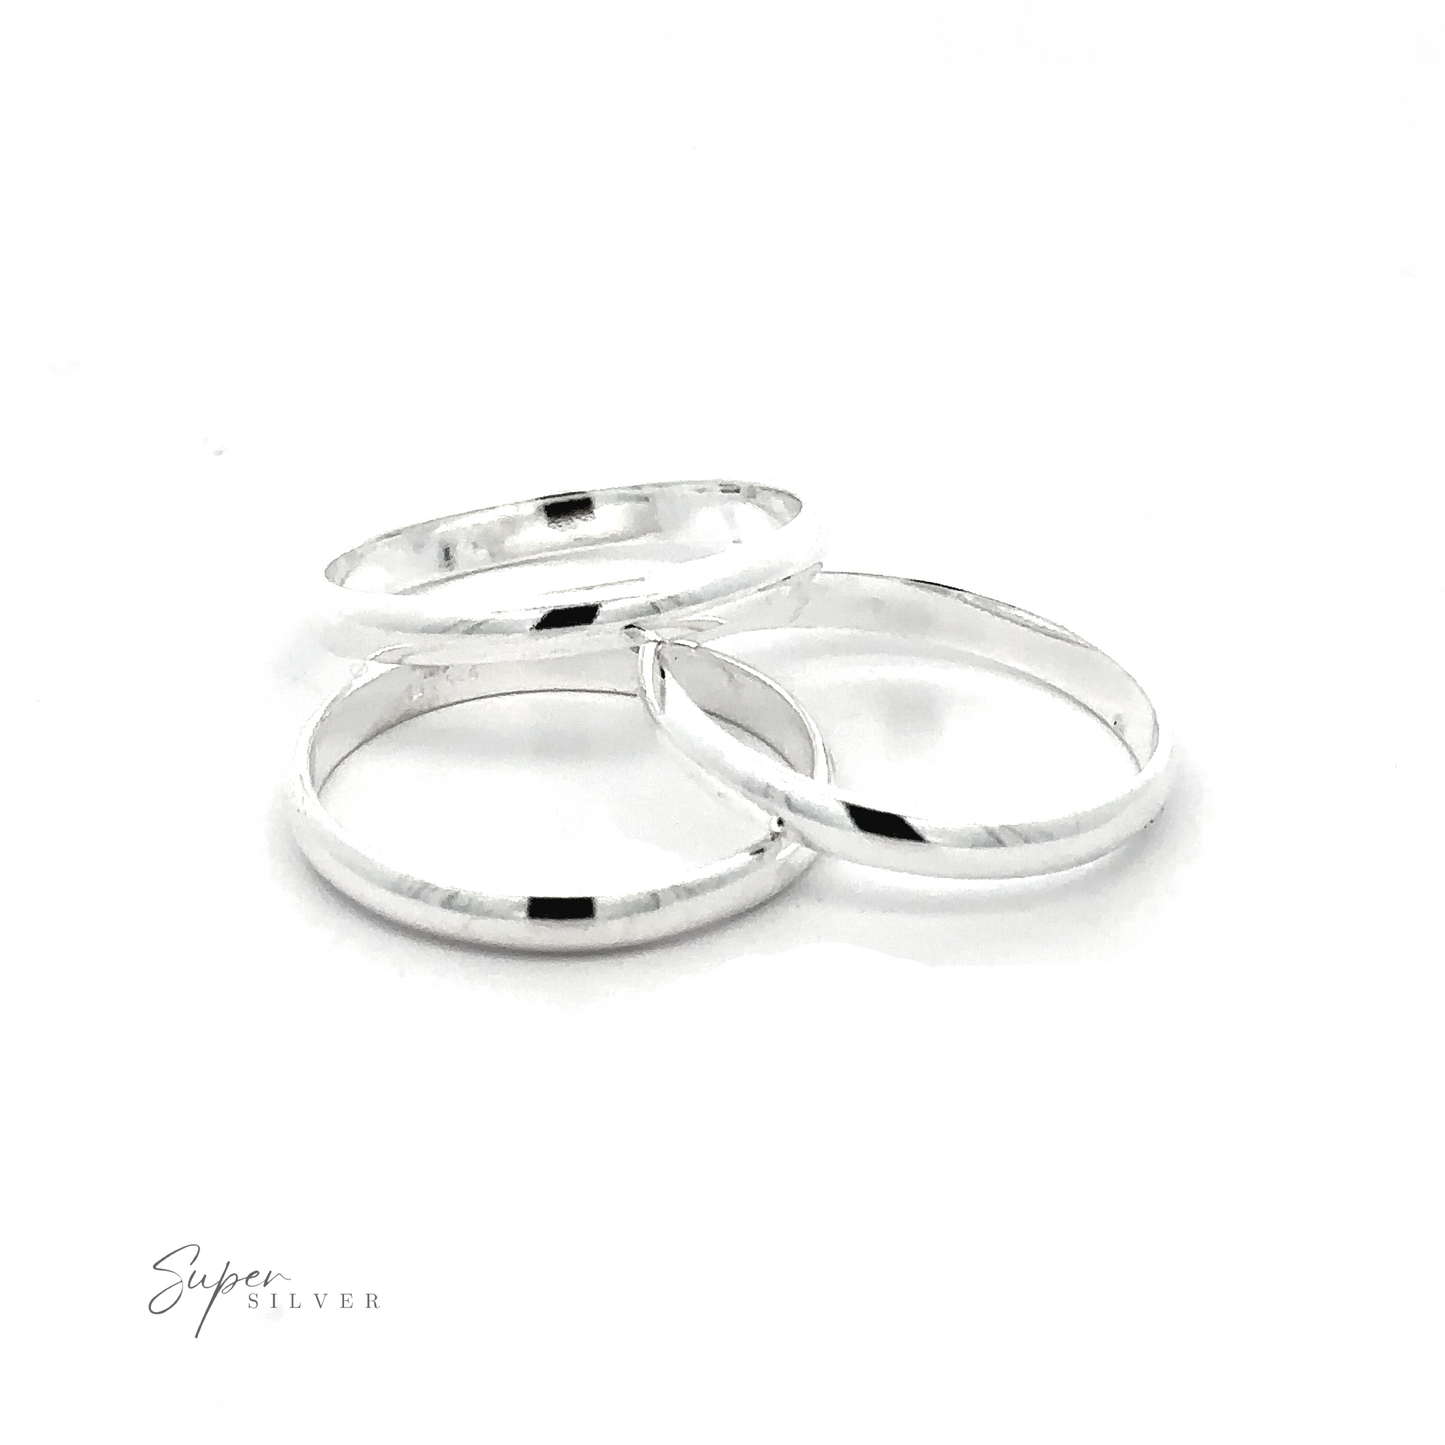 Three 2.5mm Plain Bands on a white background for a minimalist everyday look.